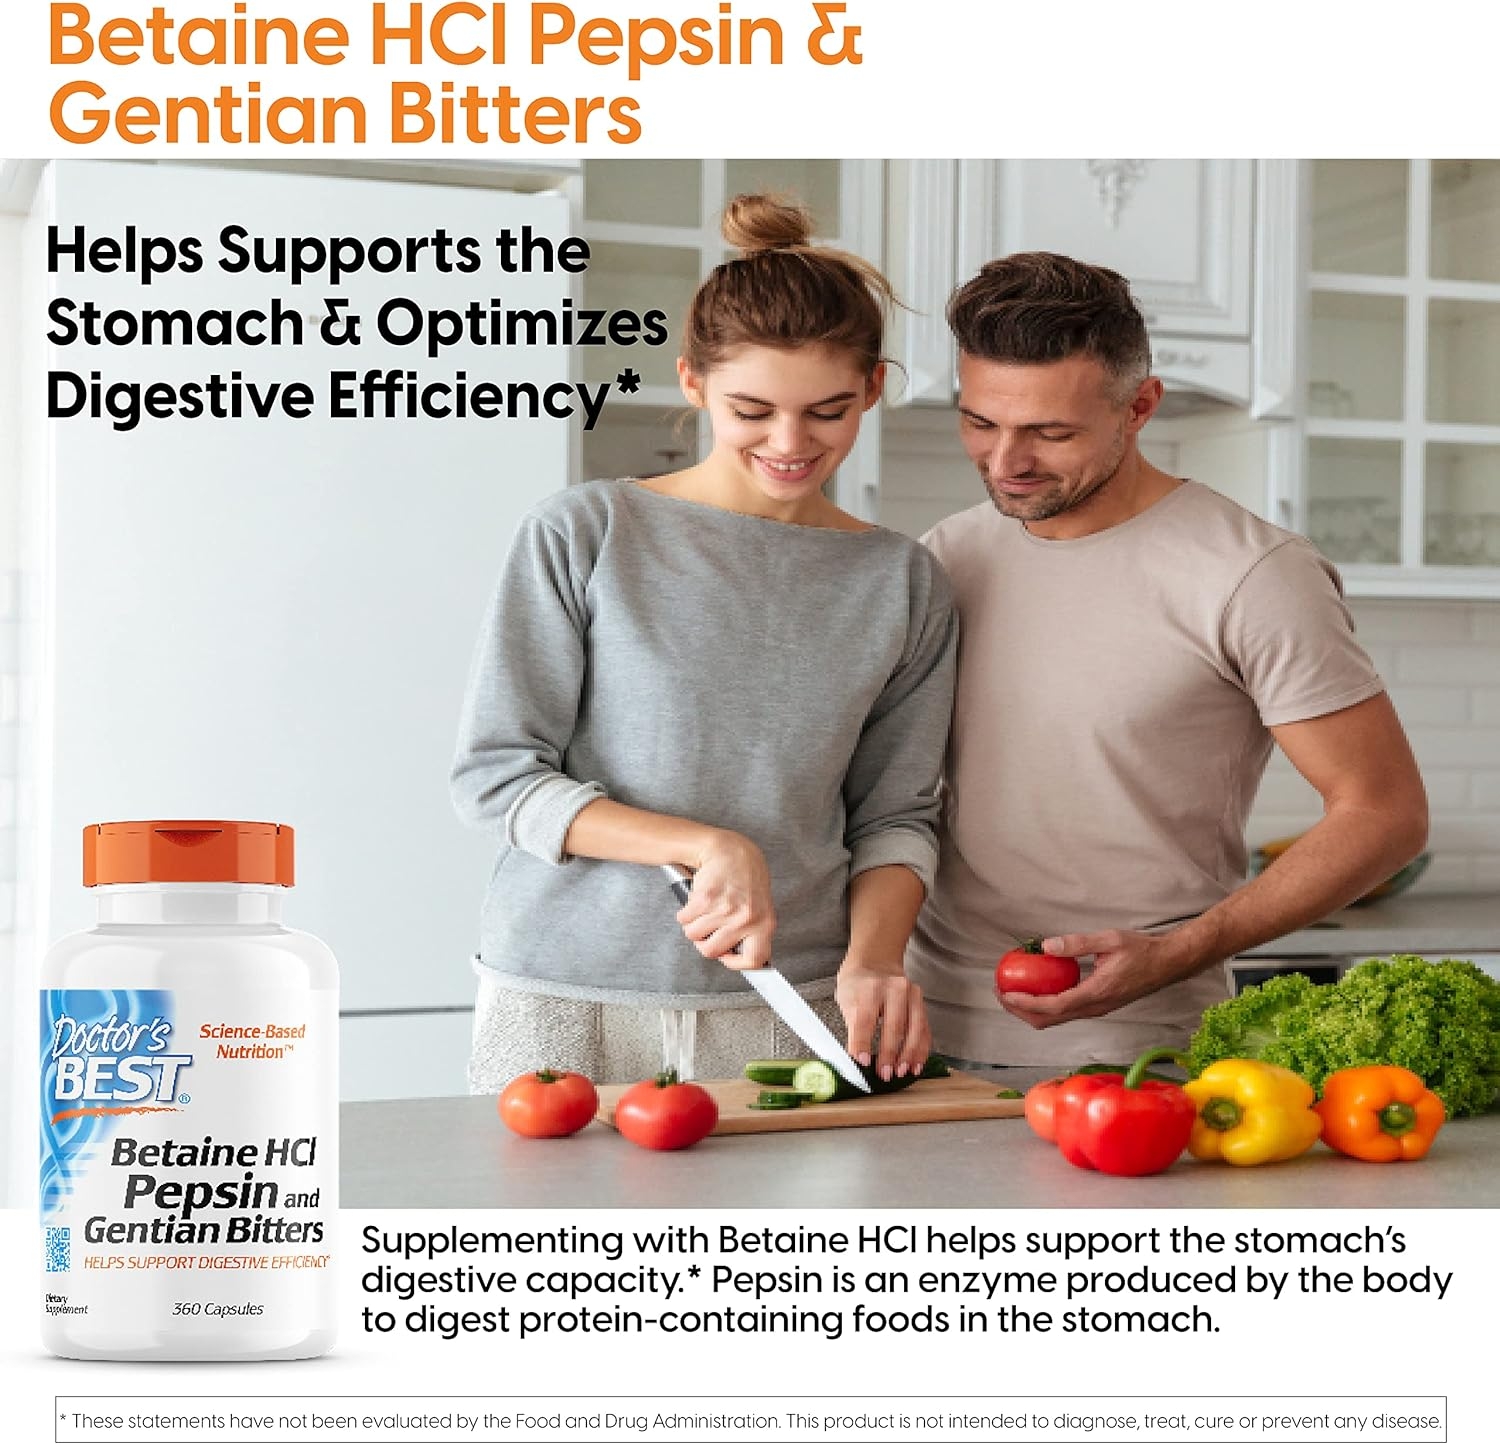 Doctor's Best Betaine HCI Pepsin & Gentian Bitters, Digestive Enzymes for Protein Breakdown & Absorption, Non-GMO, Gluten Free, 360 Count (Pack of 1)